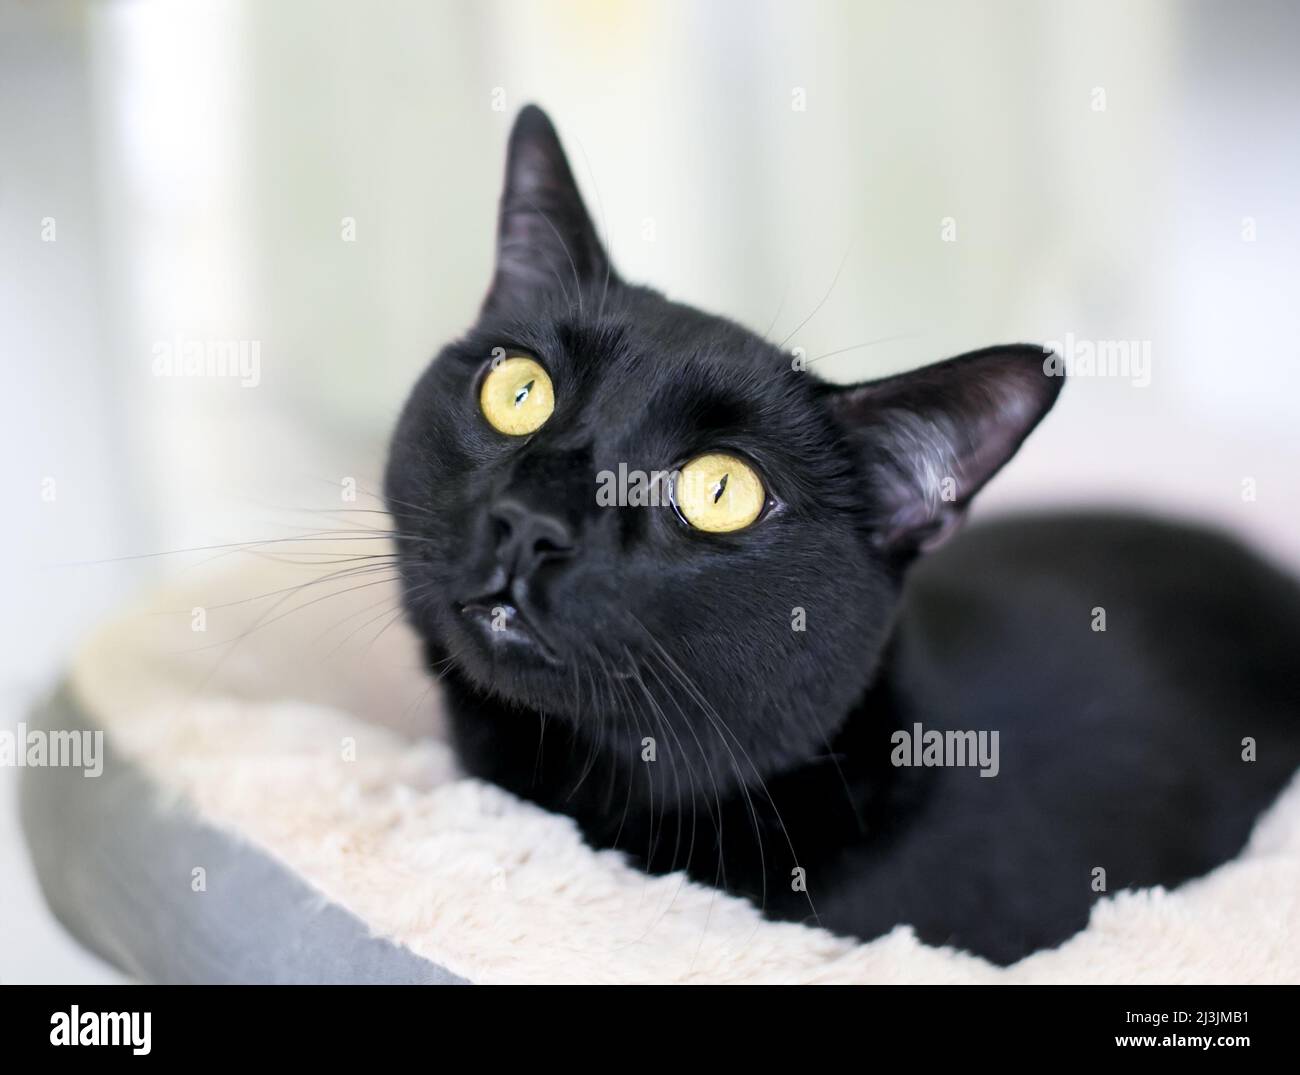 A wide eyed black shorthair cat with constricted pupils lying on a cat bed Stock Photo